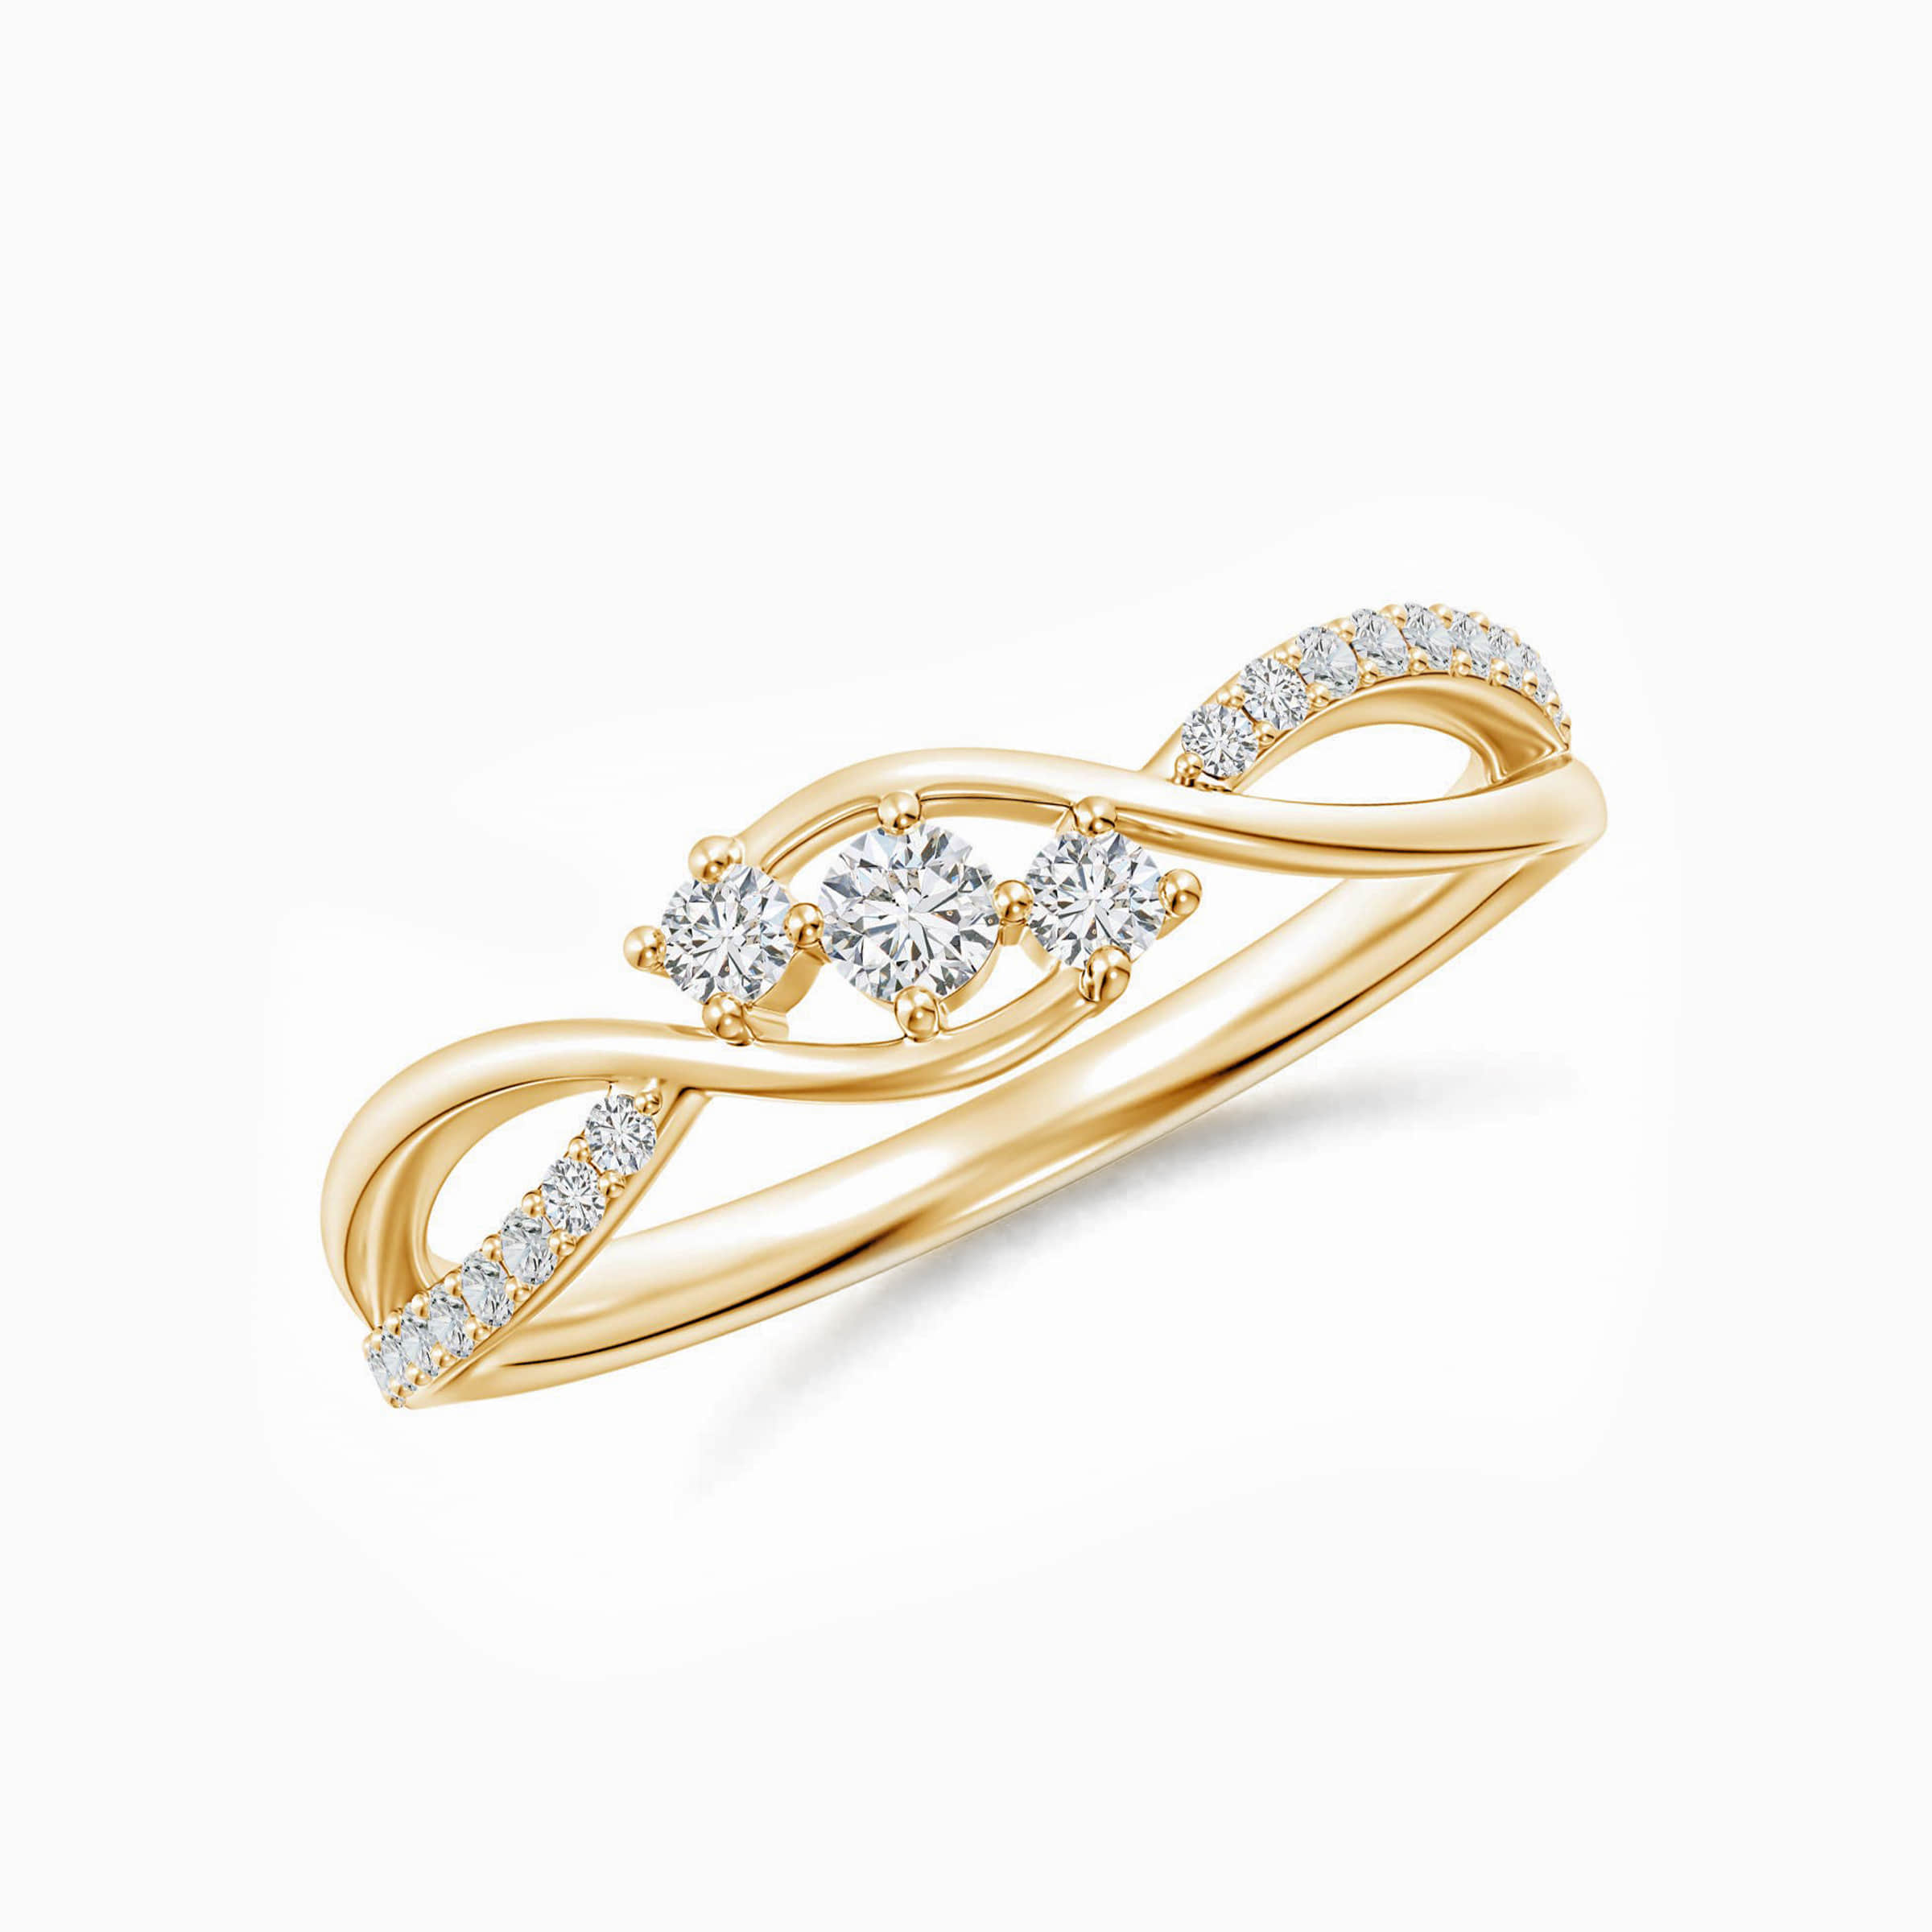 Darry Ring diamond promise ring for her in yellow gold